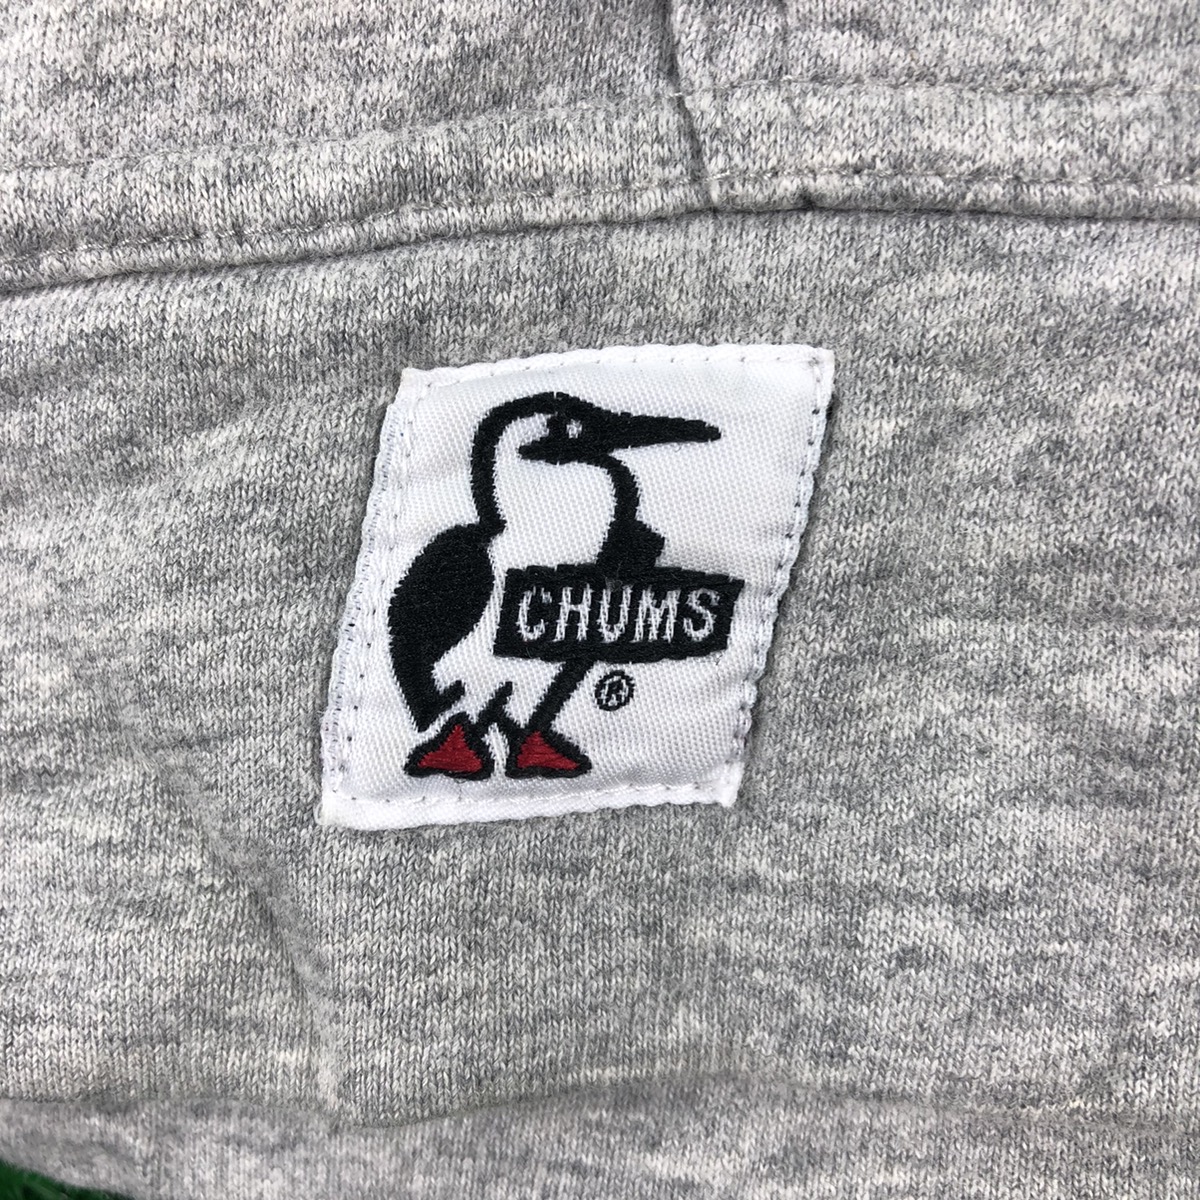 Outdoor Style Go Out! - Chums Box Logo Sweatshirt Hoodie Pullover - 10